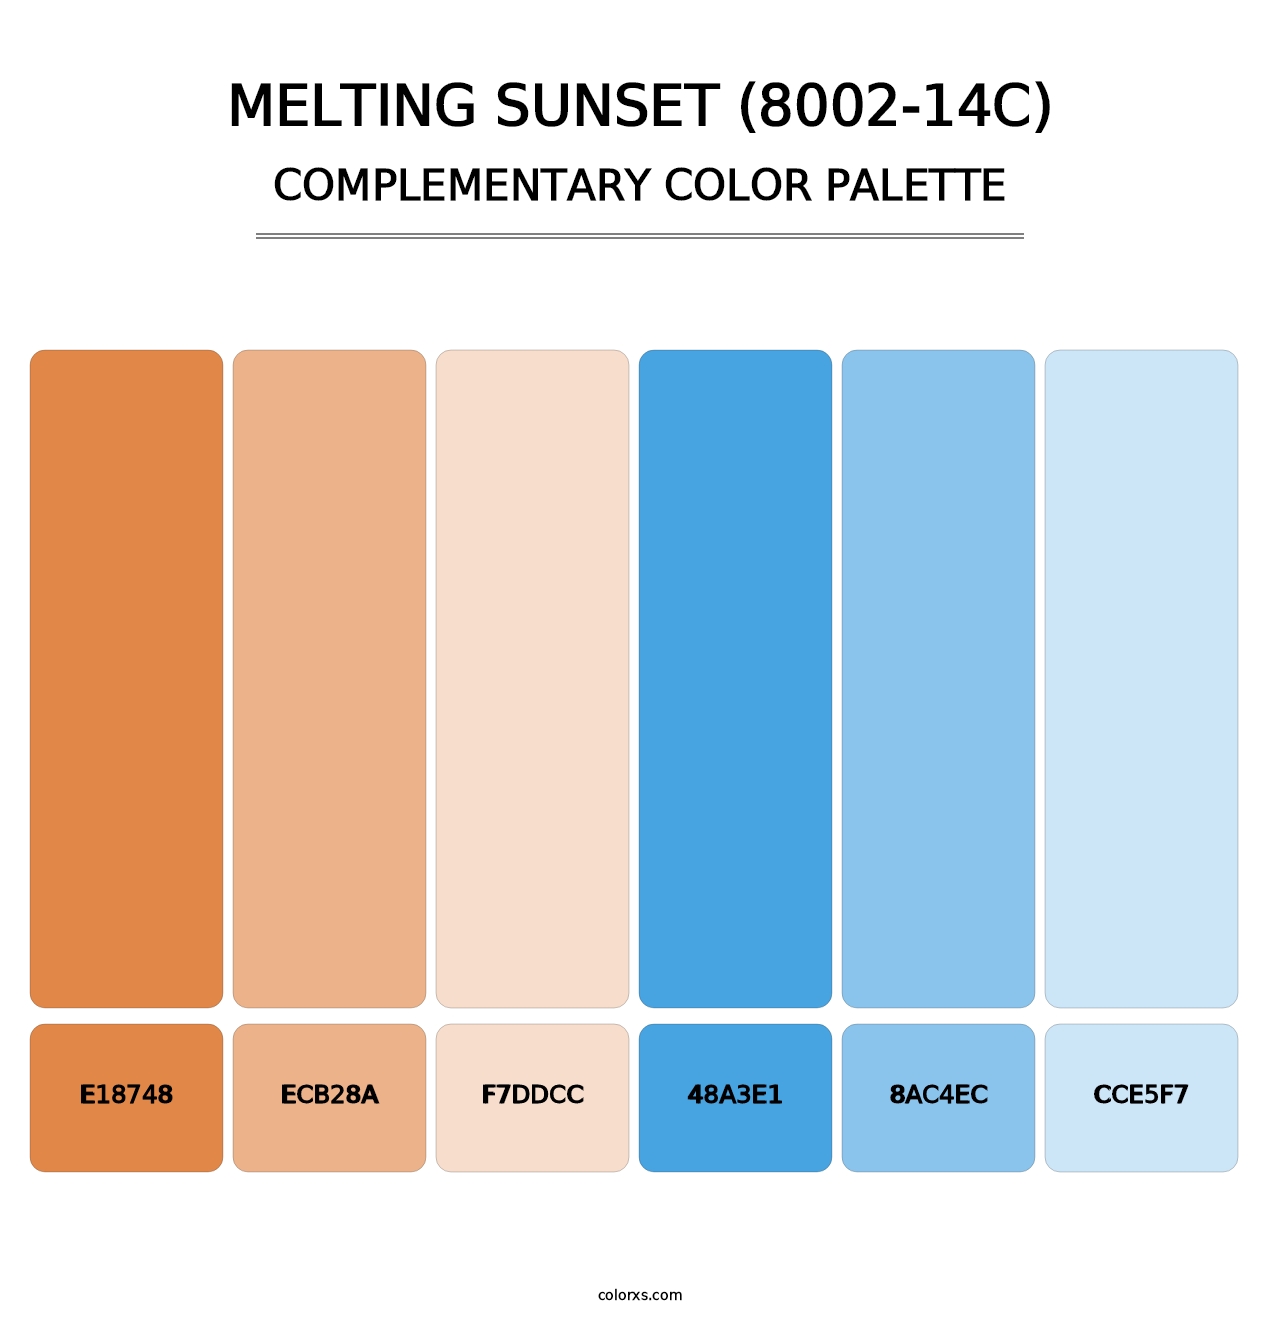 Melting Sunset (8002-14C) - Complementary Color Palette